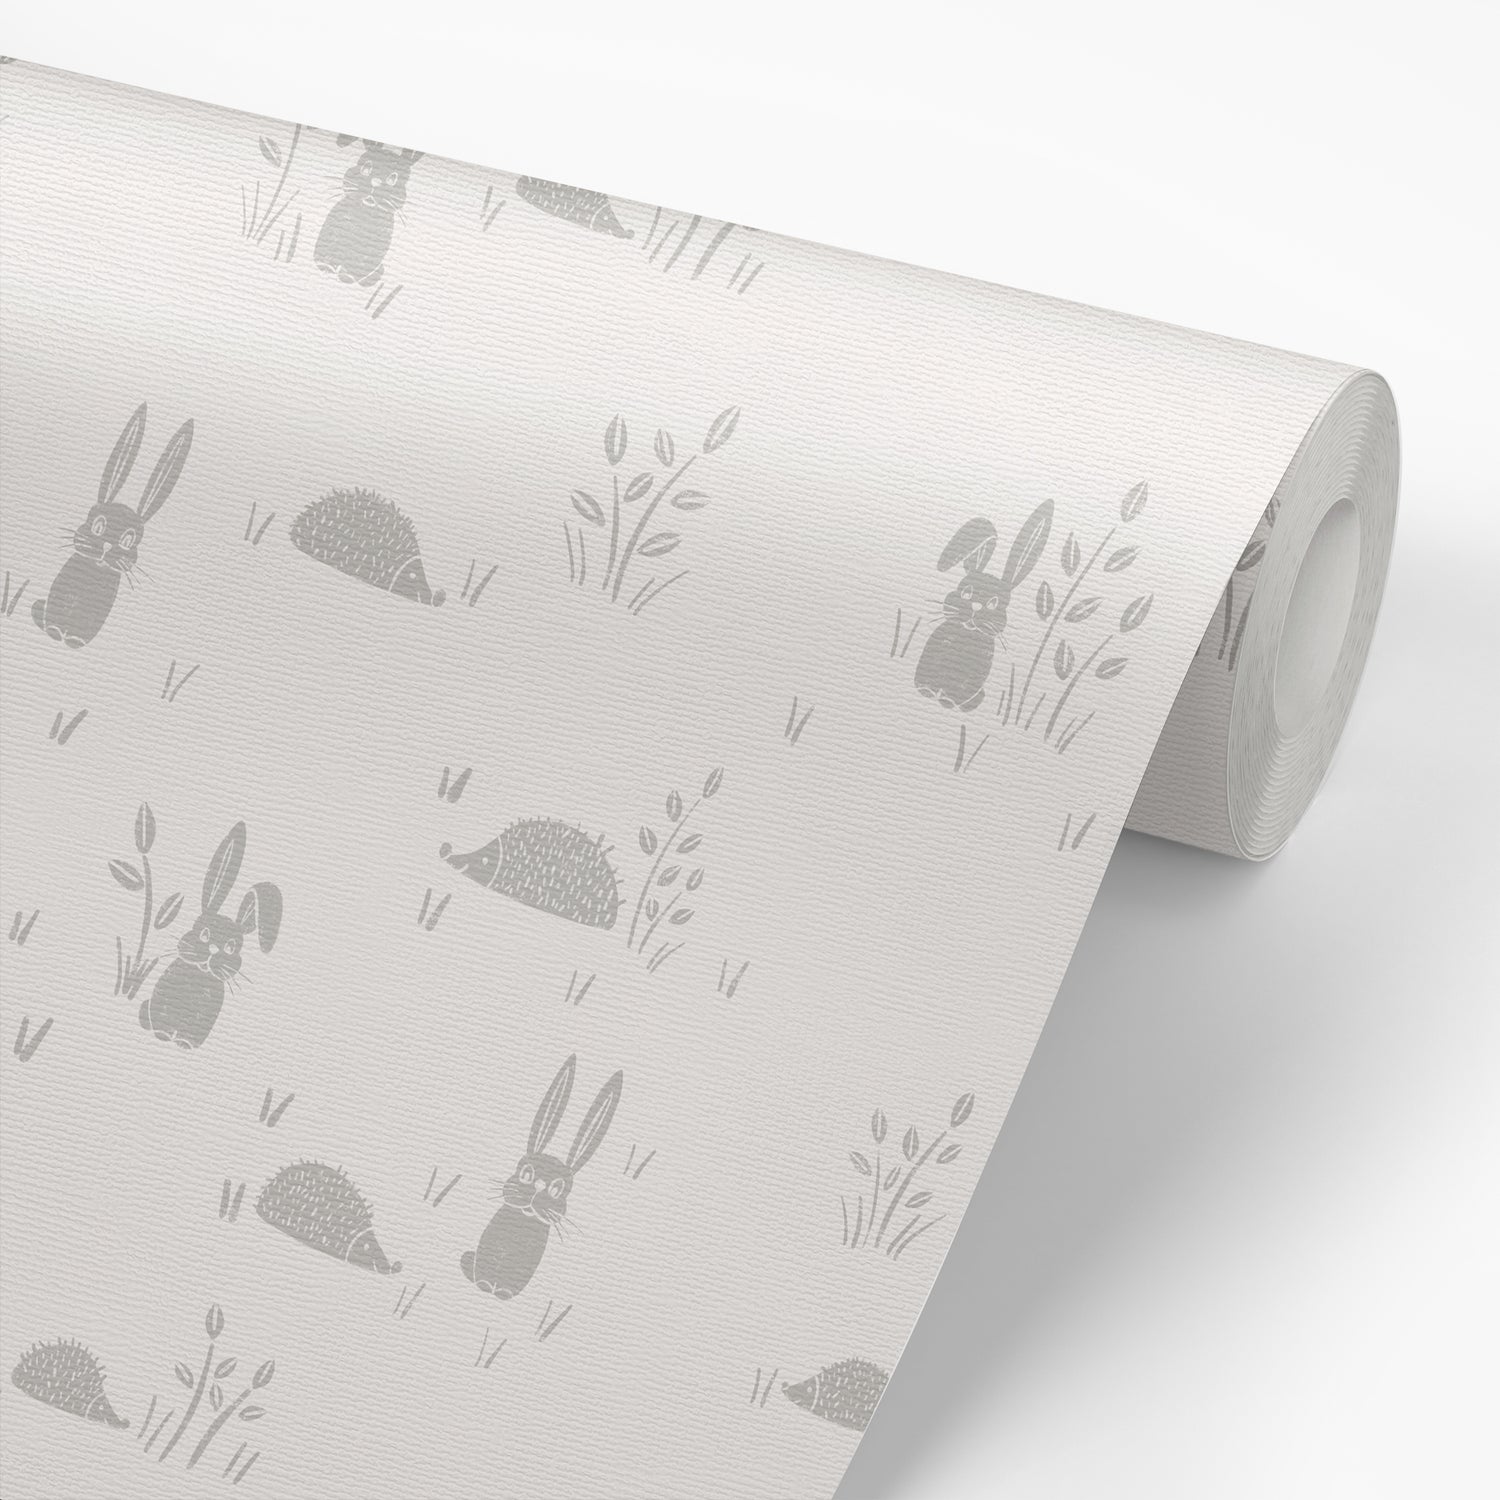 Hedgehogs and Rabbits Wallpaper in Gray shown on a roll of wallpaper.